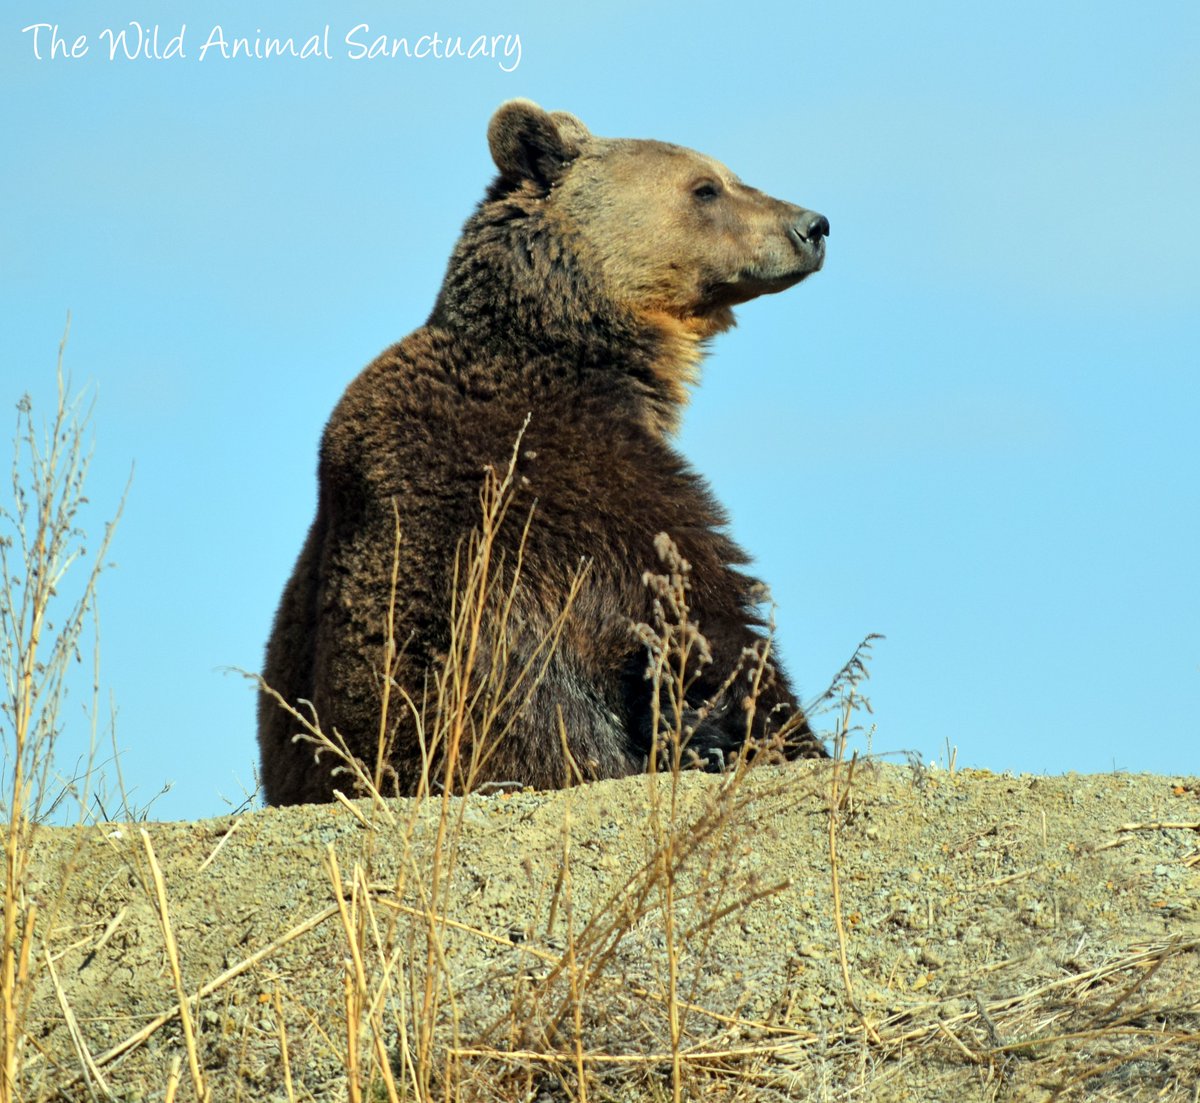 Picture Of The Day!
Location: The Wild Animal Sanctuary, Keenesburg, CO.

Rescue Bear Spotlight! ✨ Happy Thursday! What do you think this beauty is pondering?

CAPTION THIS!

#TheWildAnimalSanctuary #wildanimalsanctuary #sanctuary #Colorado #captionthis #rescuebear